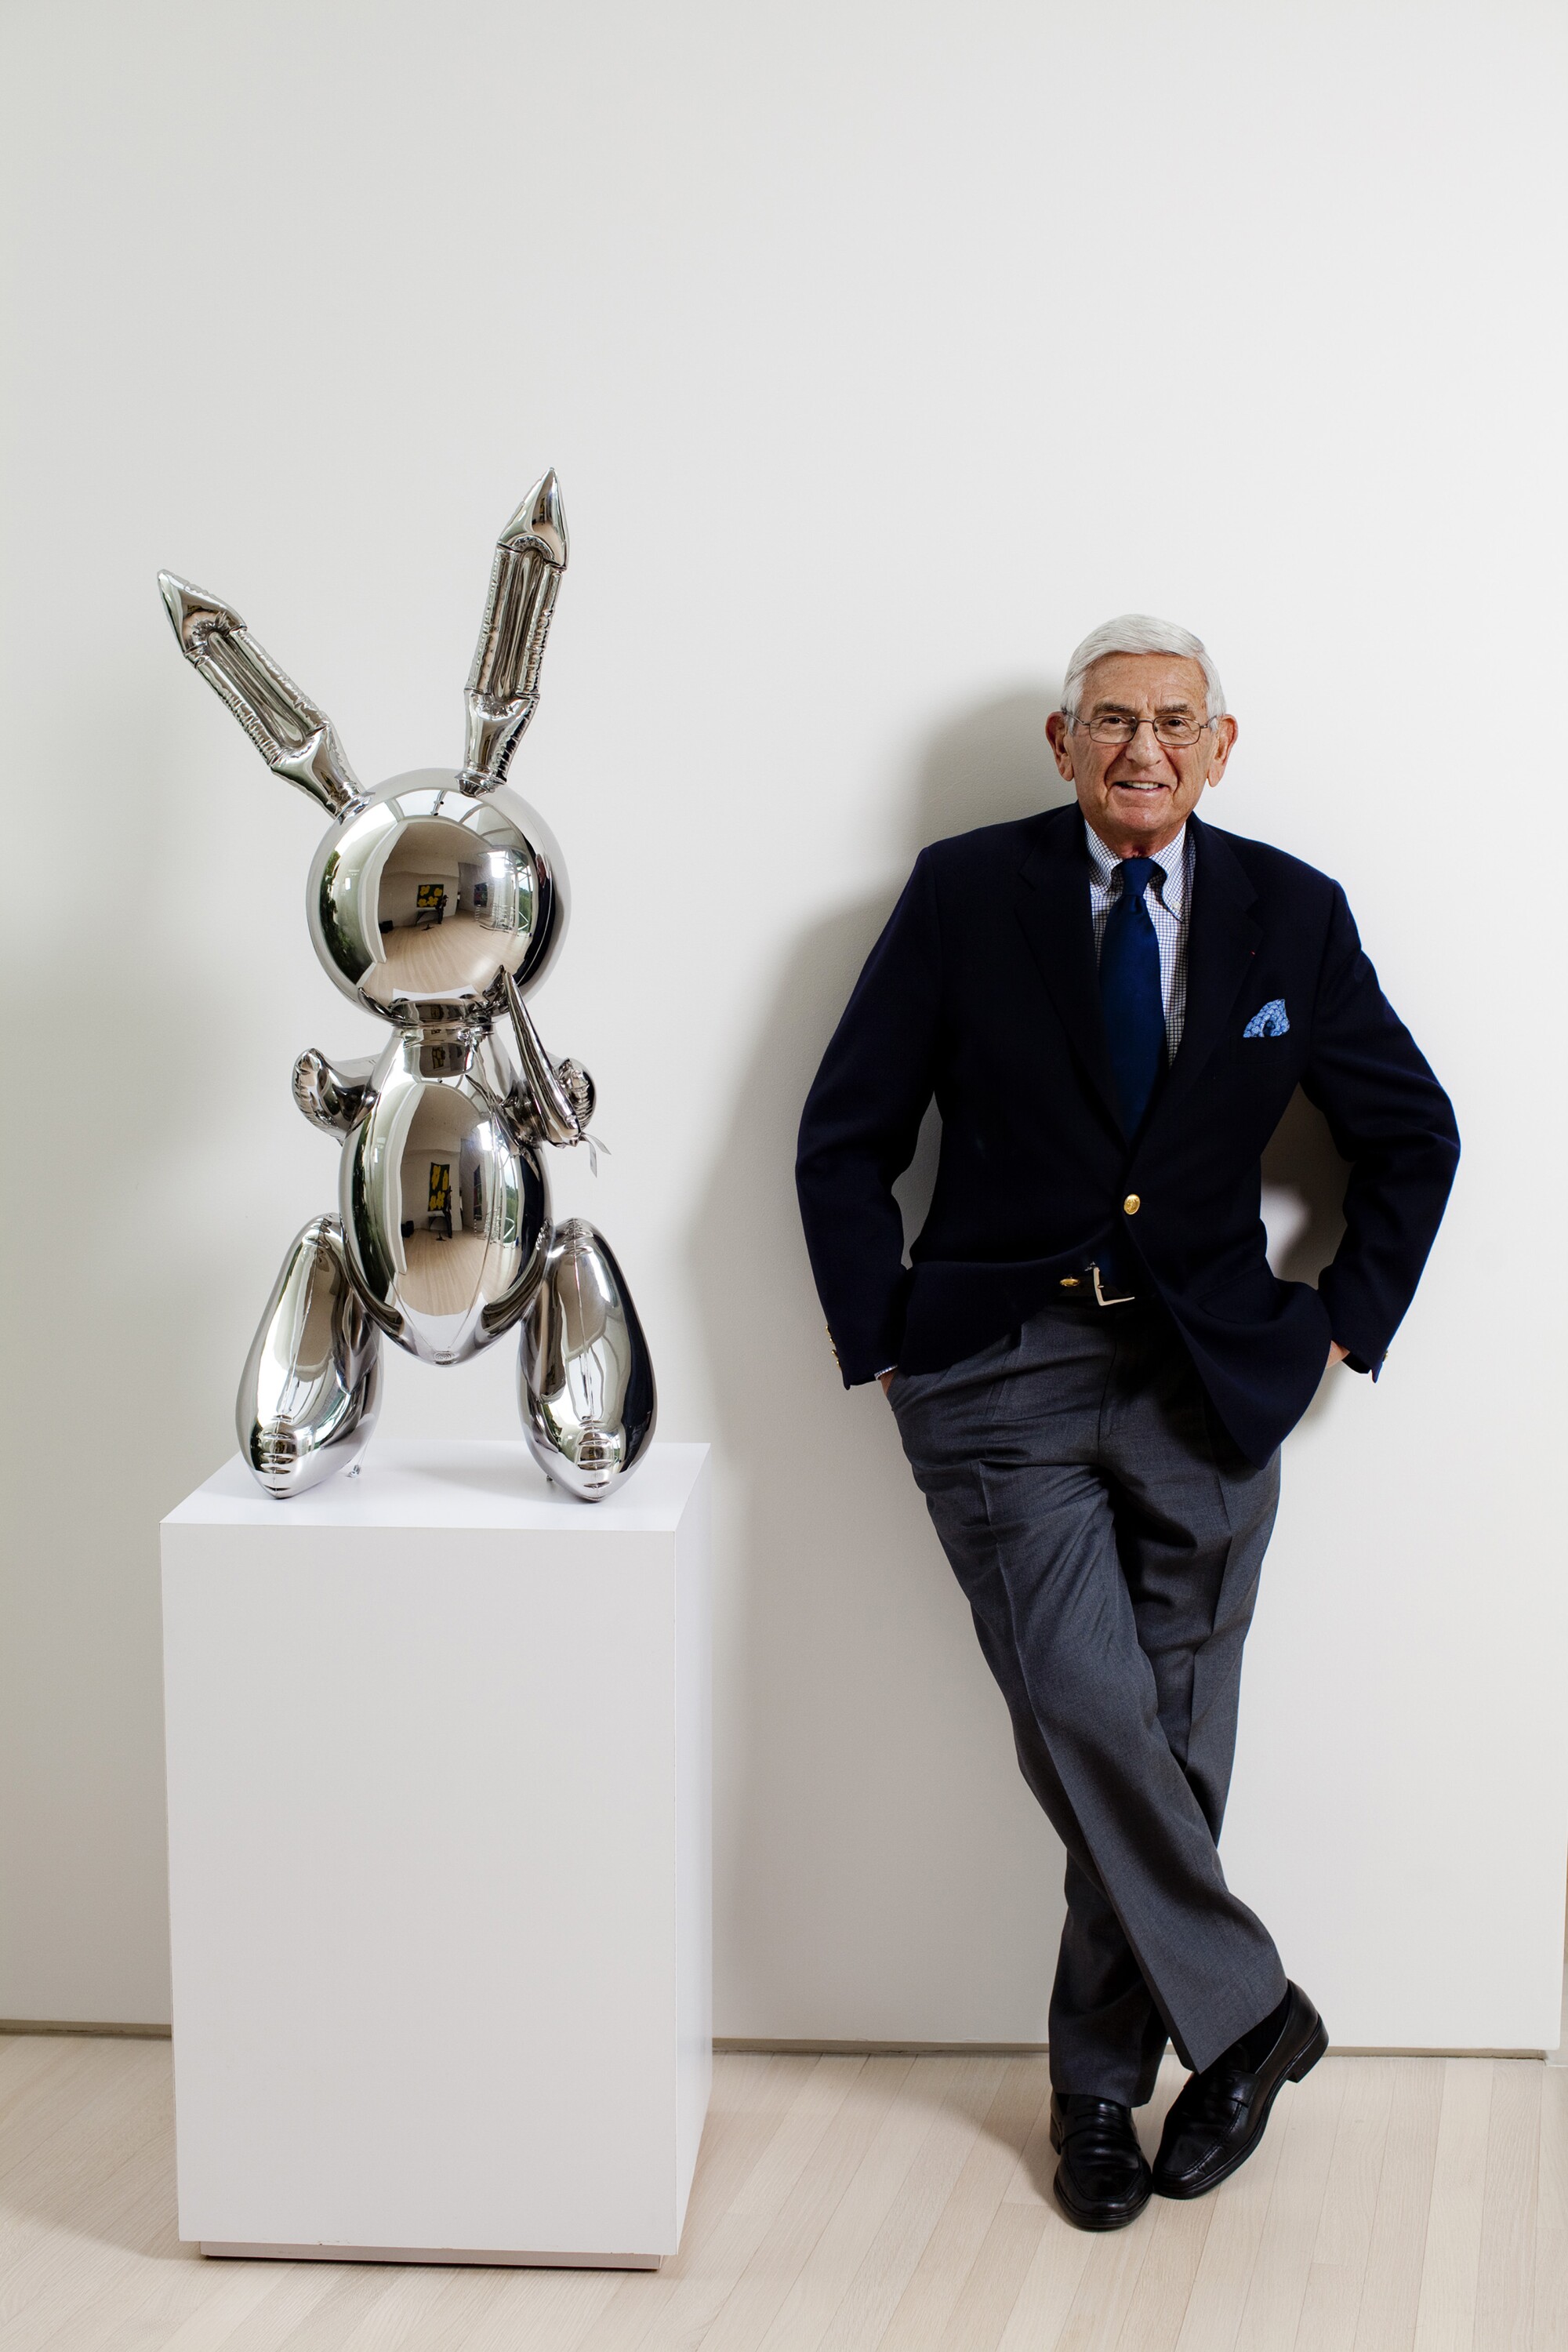 Eli Broad, hands in his pockets, leans against a white wall next to a gray metal sculpture on a plinth.